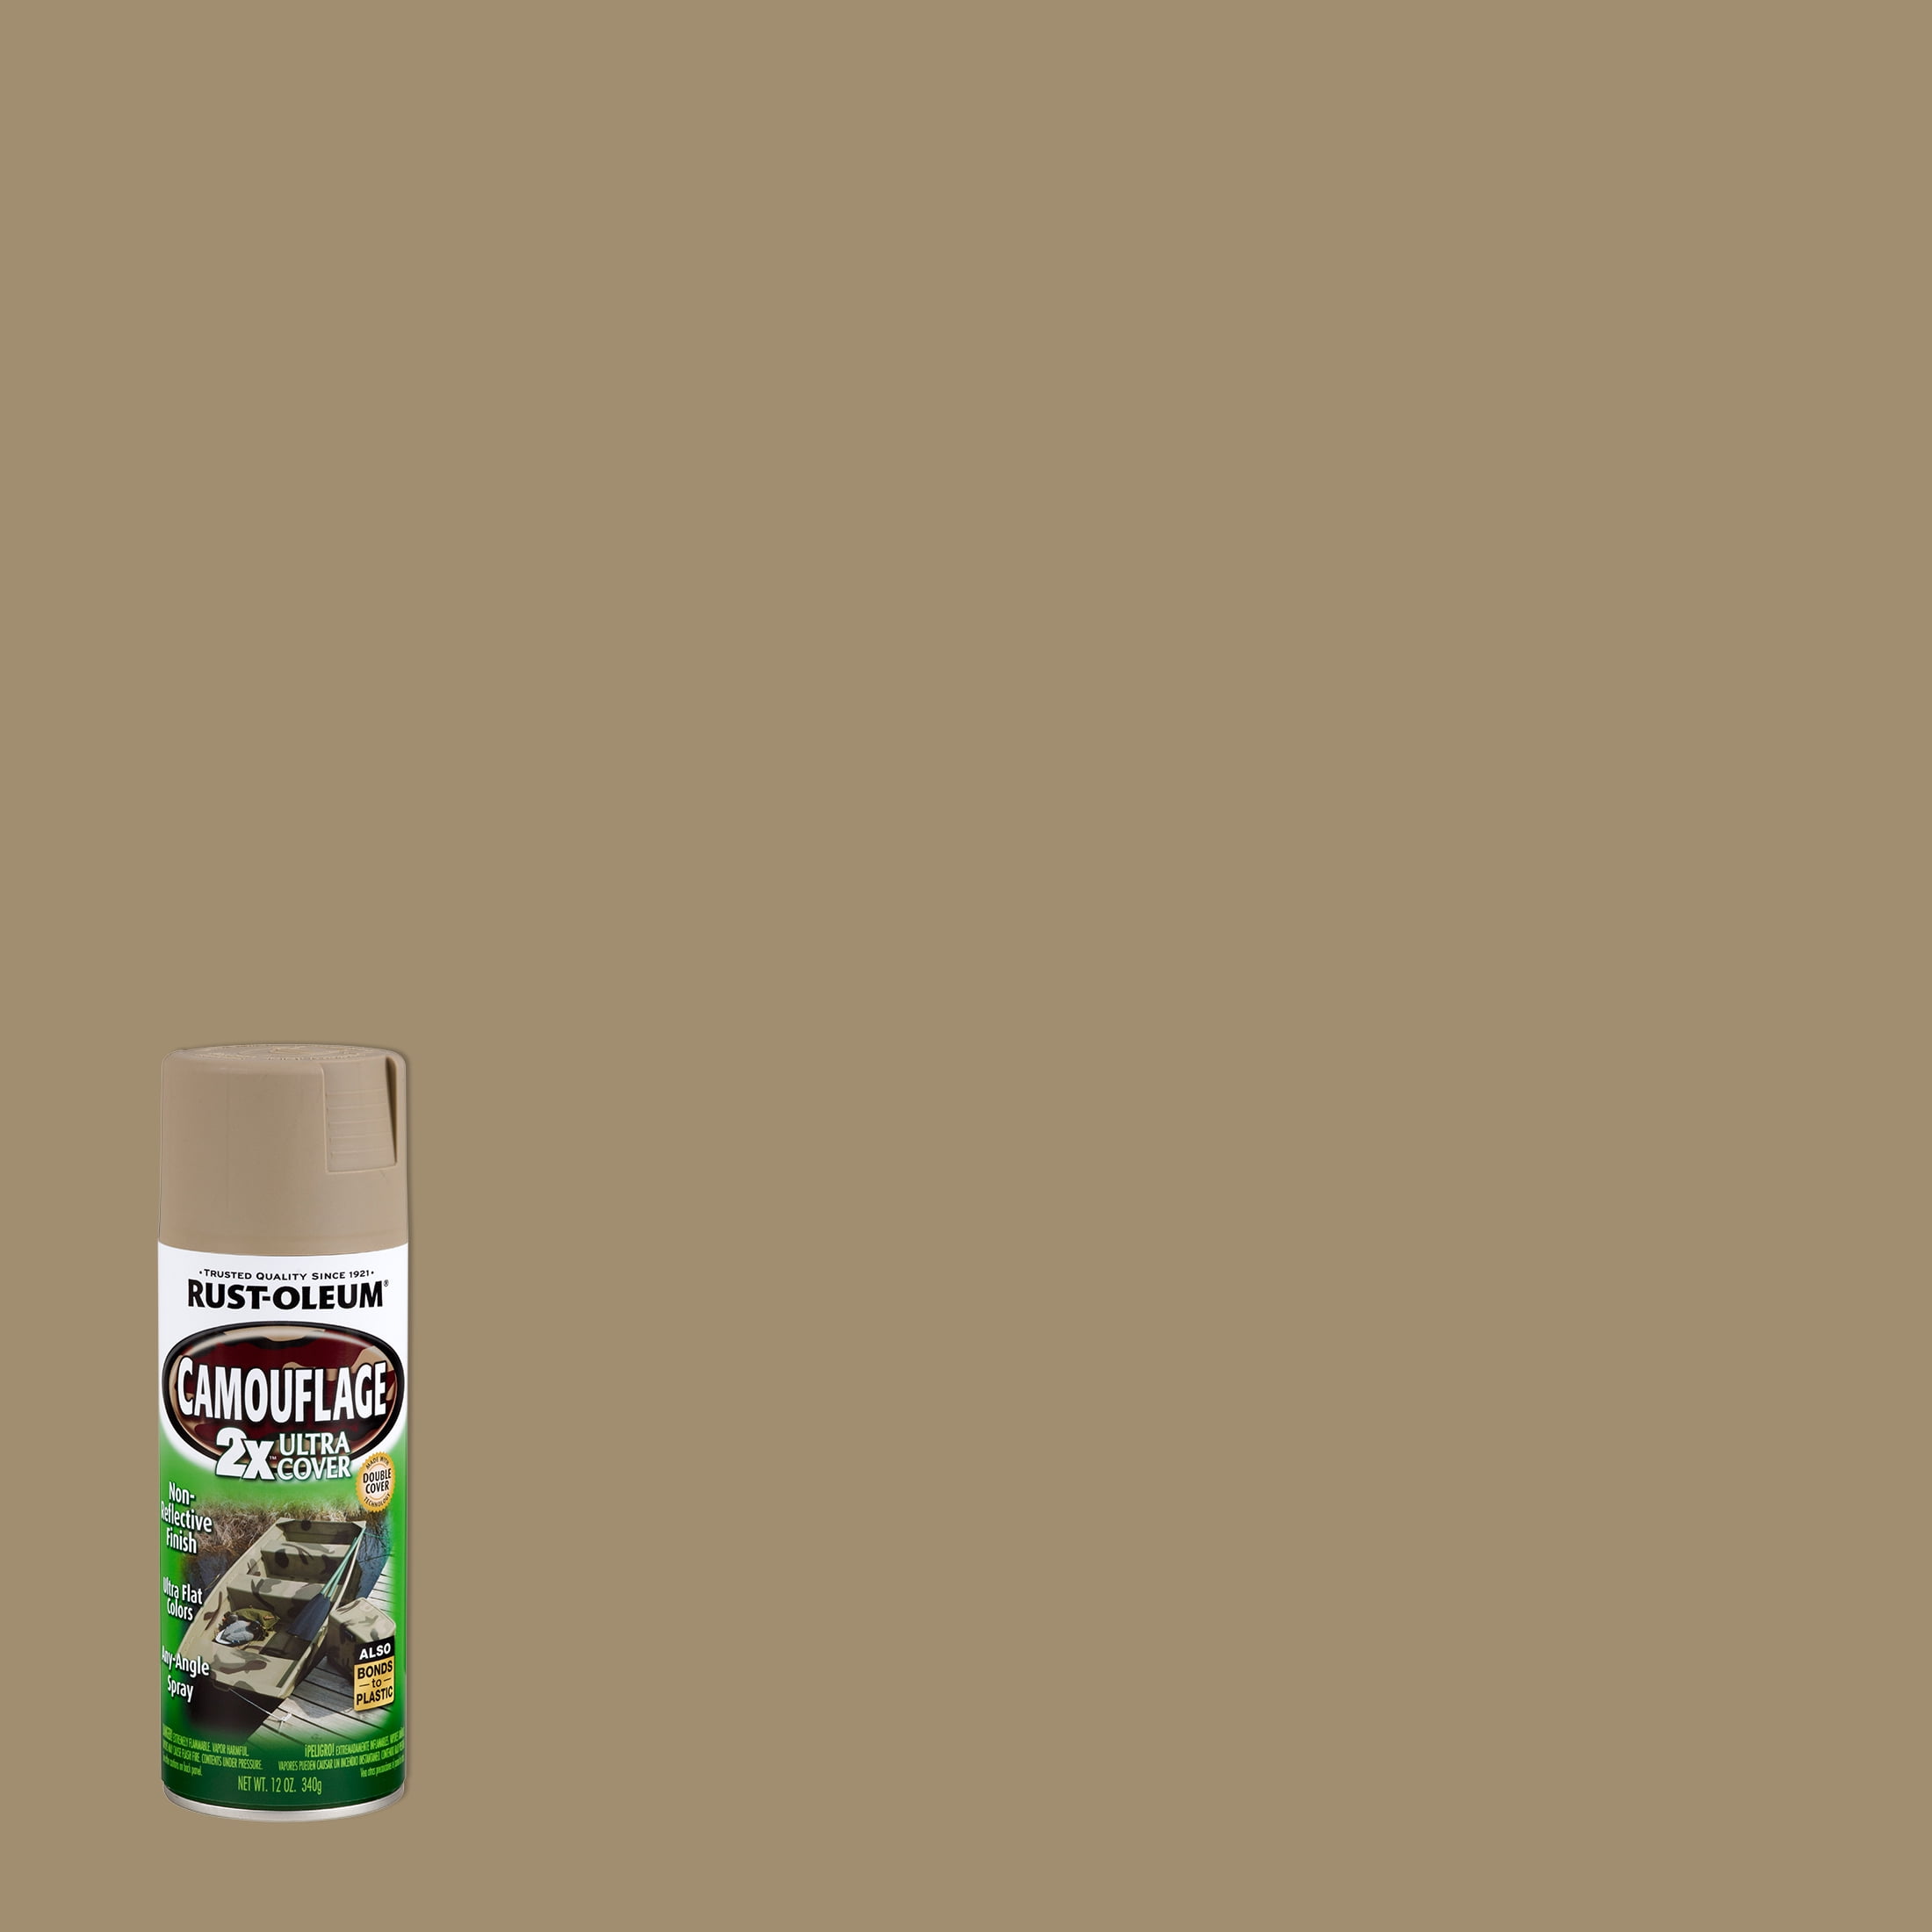 Rust-Oleum 279176 Specialty Camouflage Ultra Cover 2X Spray Paint,  12-Ounce, Army Green